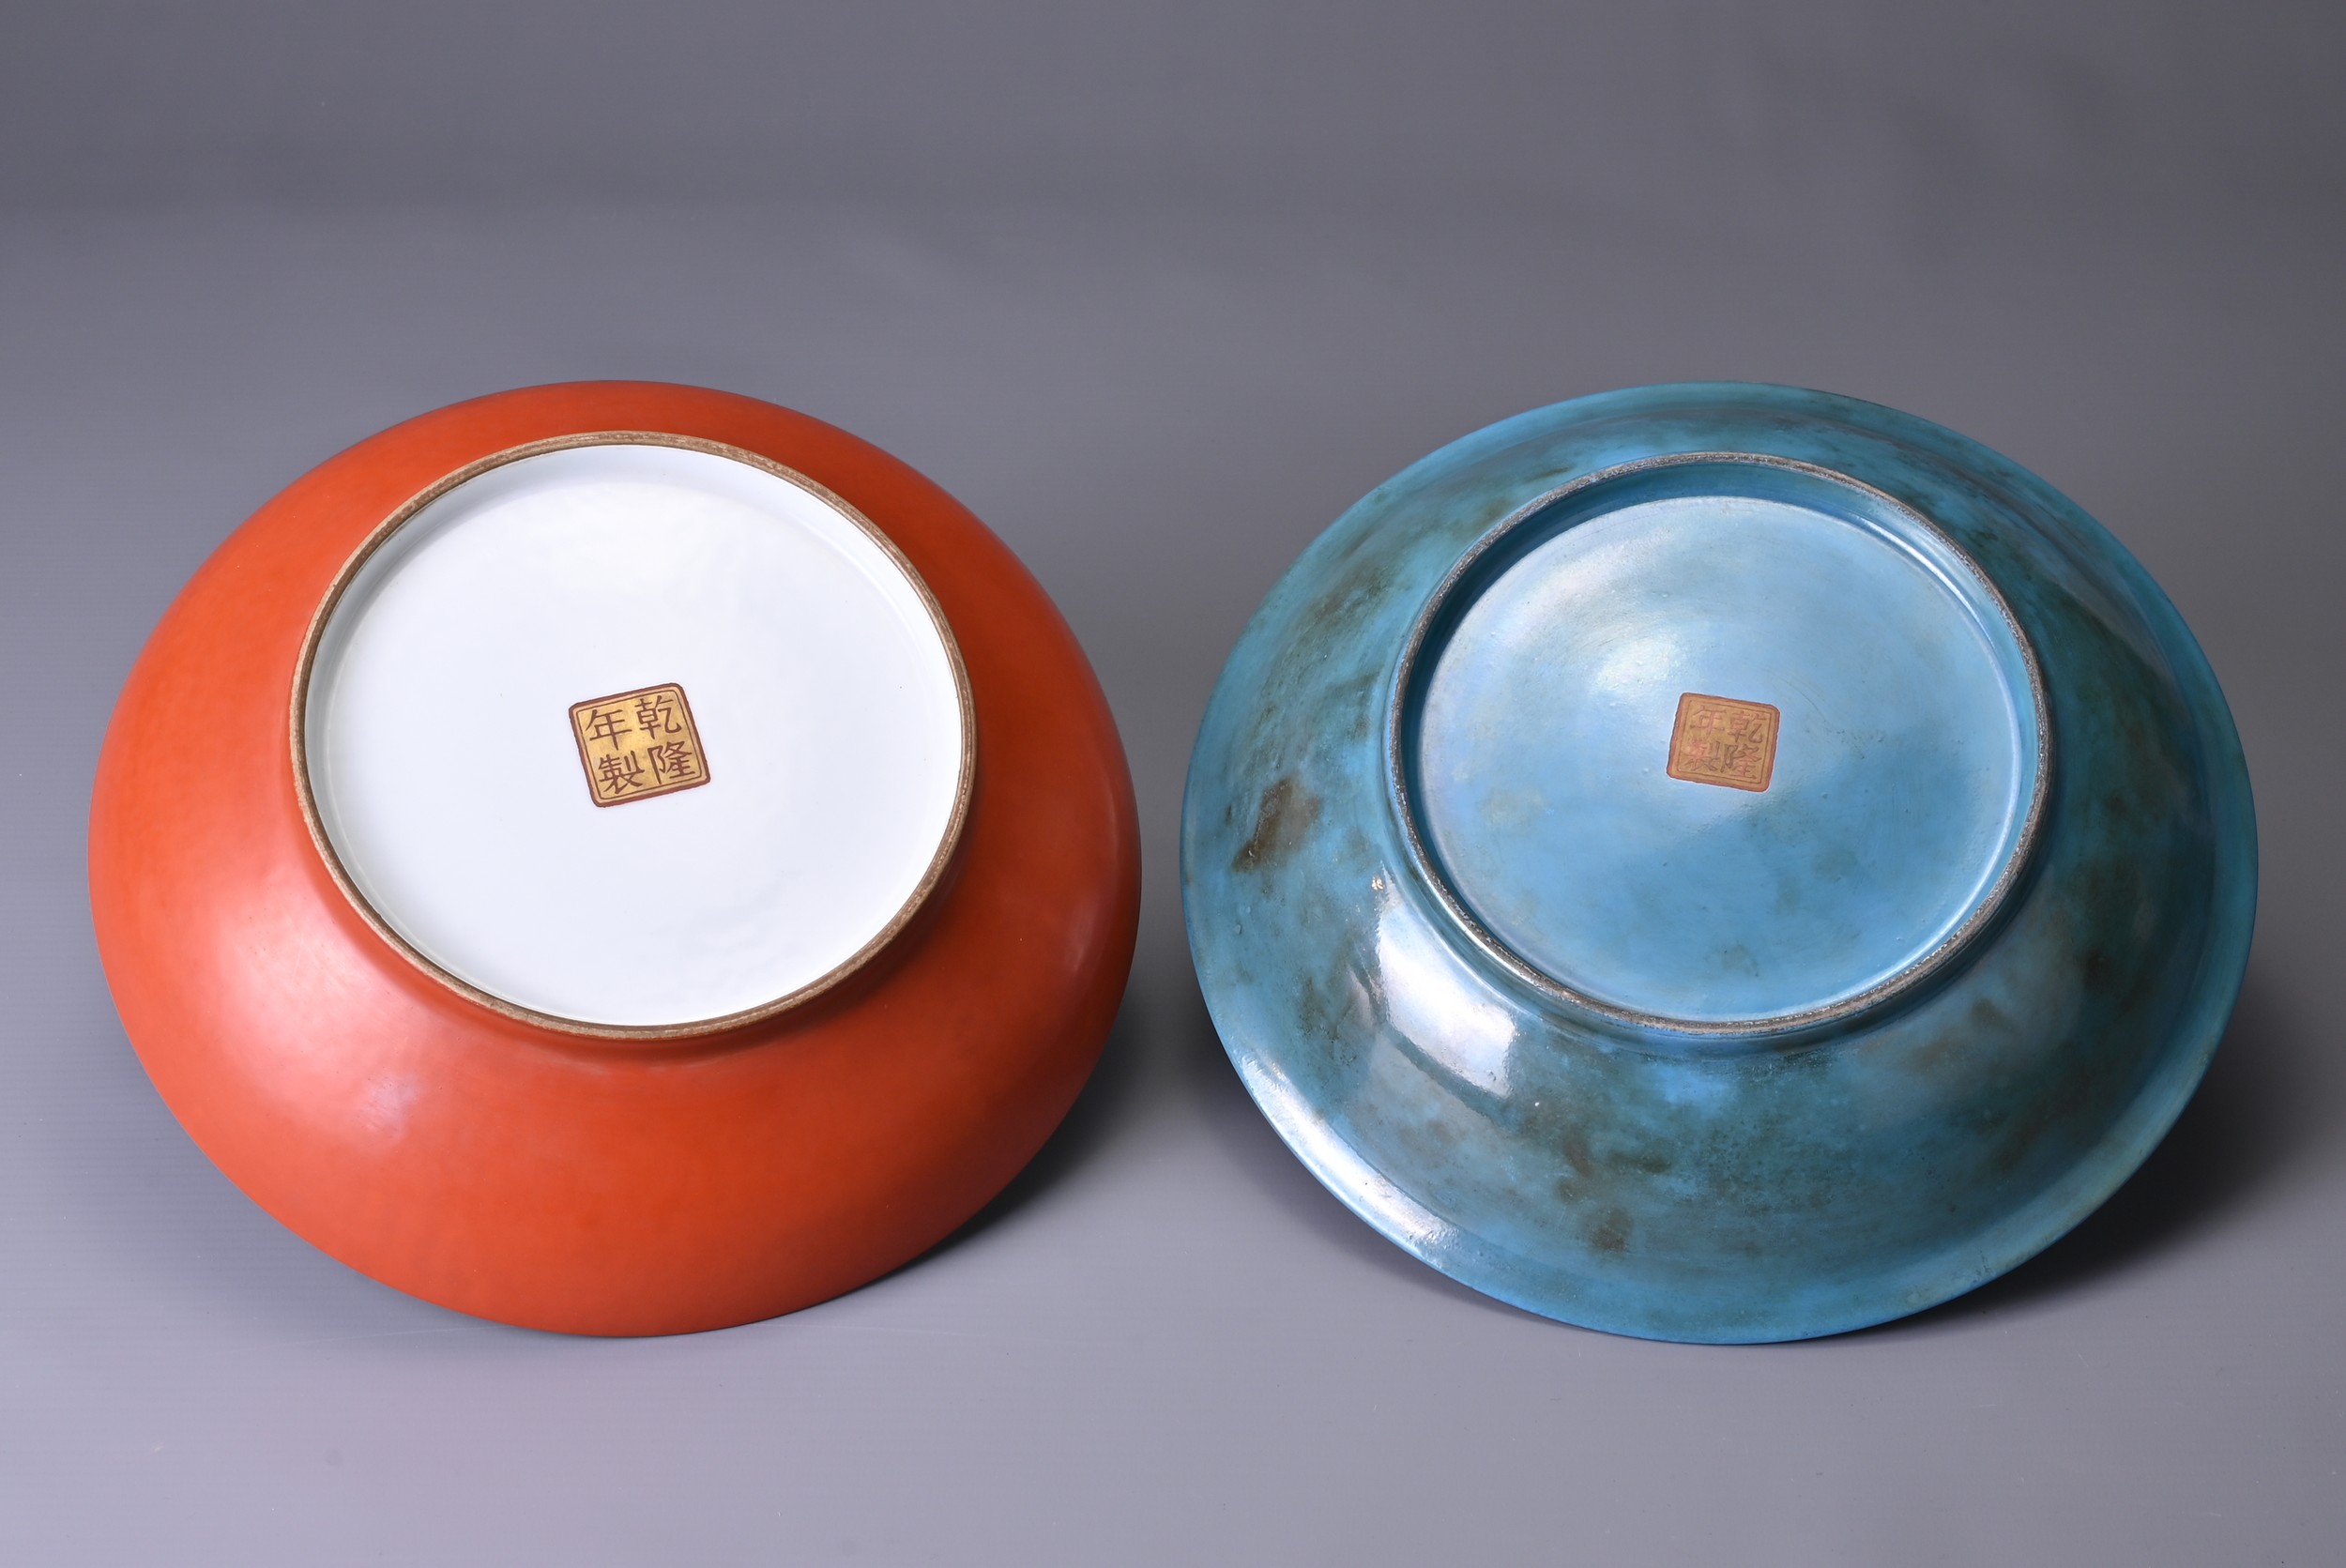 TWO CHINESE PORCELAIN FAMILLE ROSE CIRCULAR DISHES, 20TH CENTURY. Each with iron-red enamel and gilt - Image 4 of 7